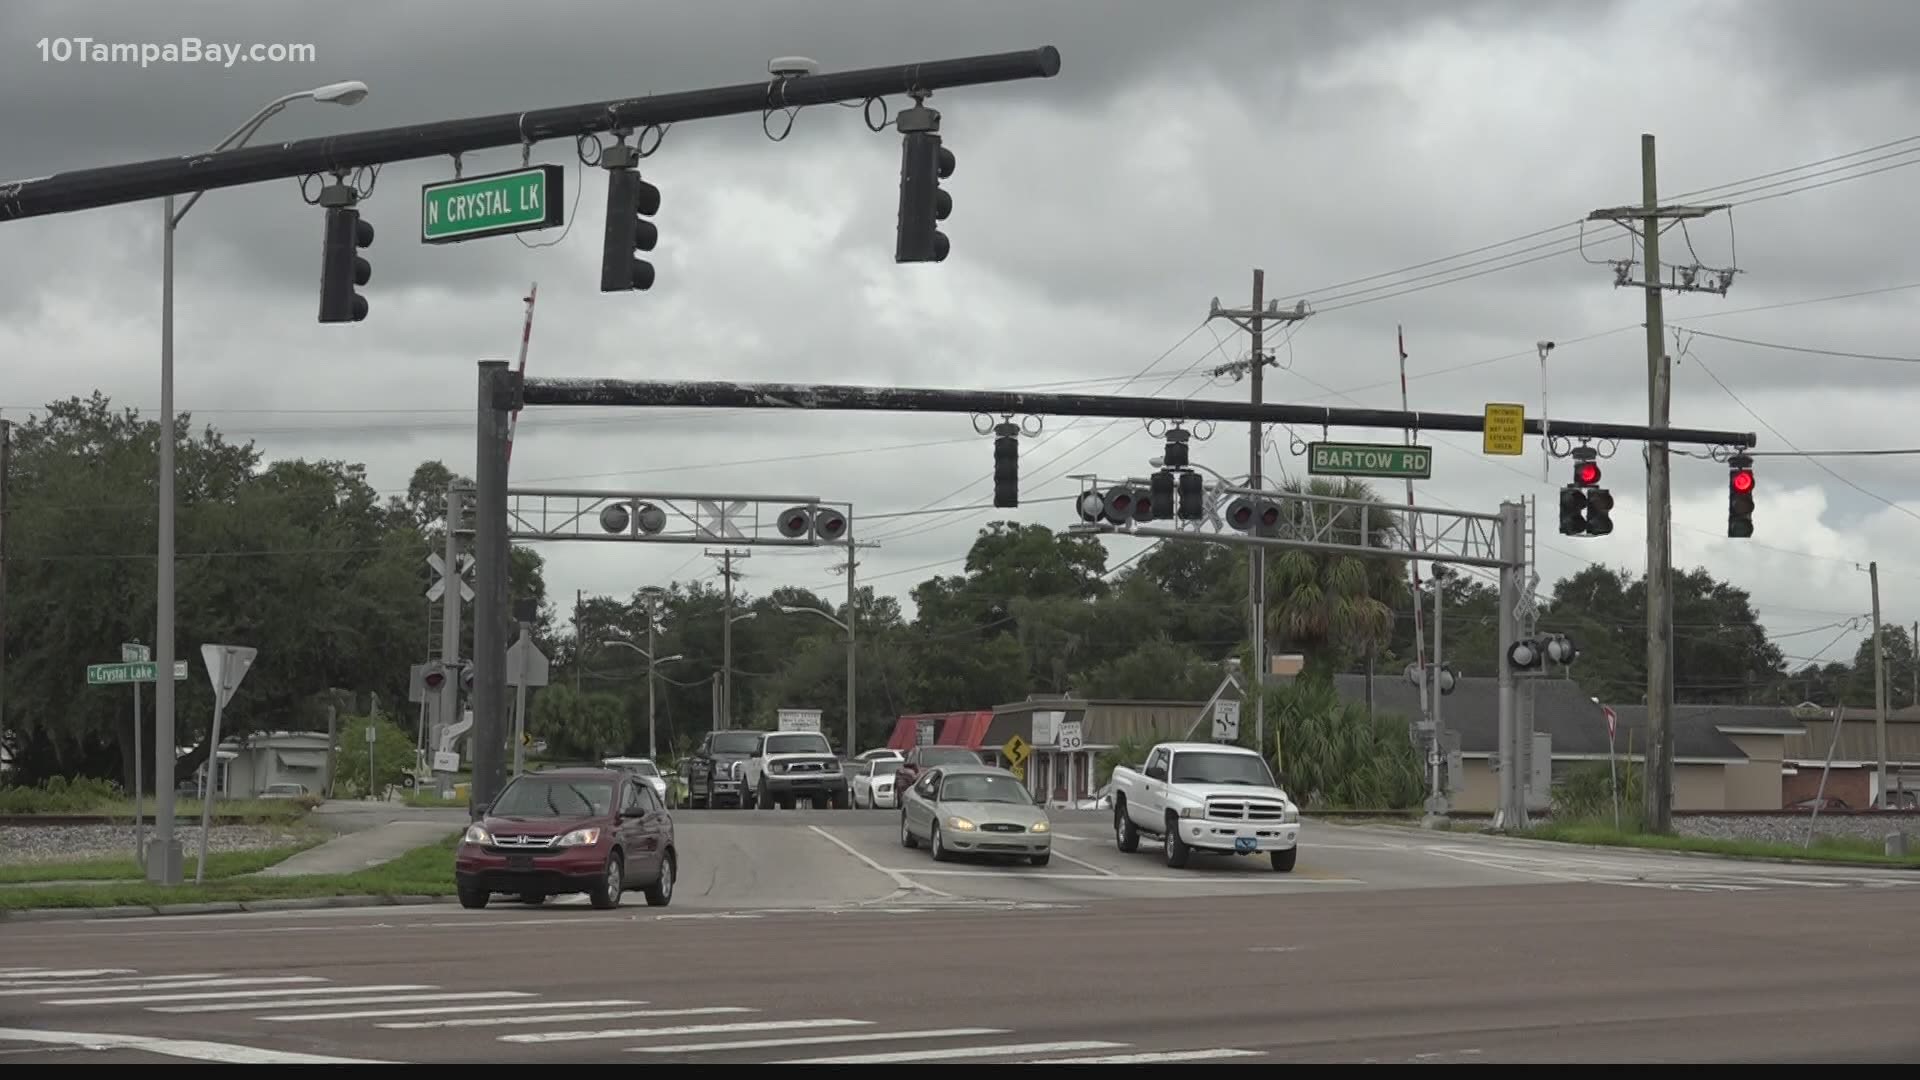 The city is testing out sensors that detect drivers quickly approaching a red light and delay green lights to avoid a crash.